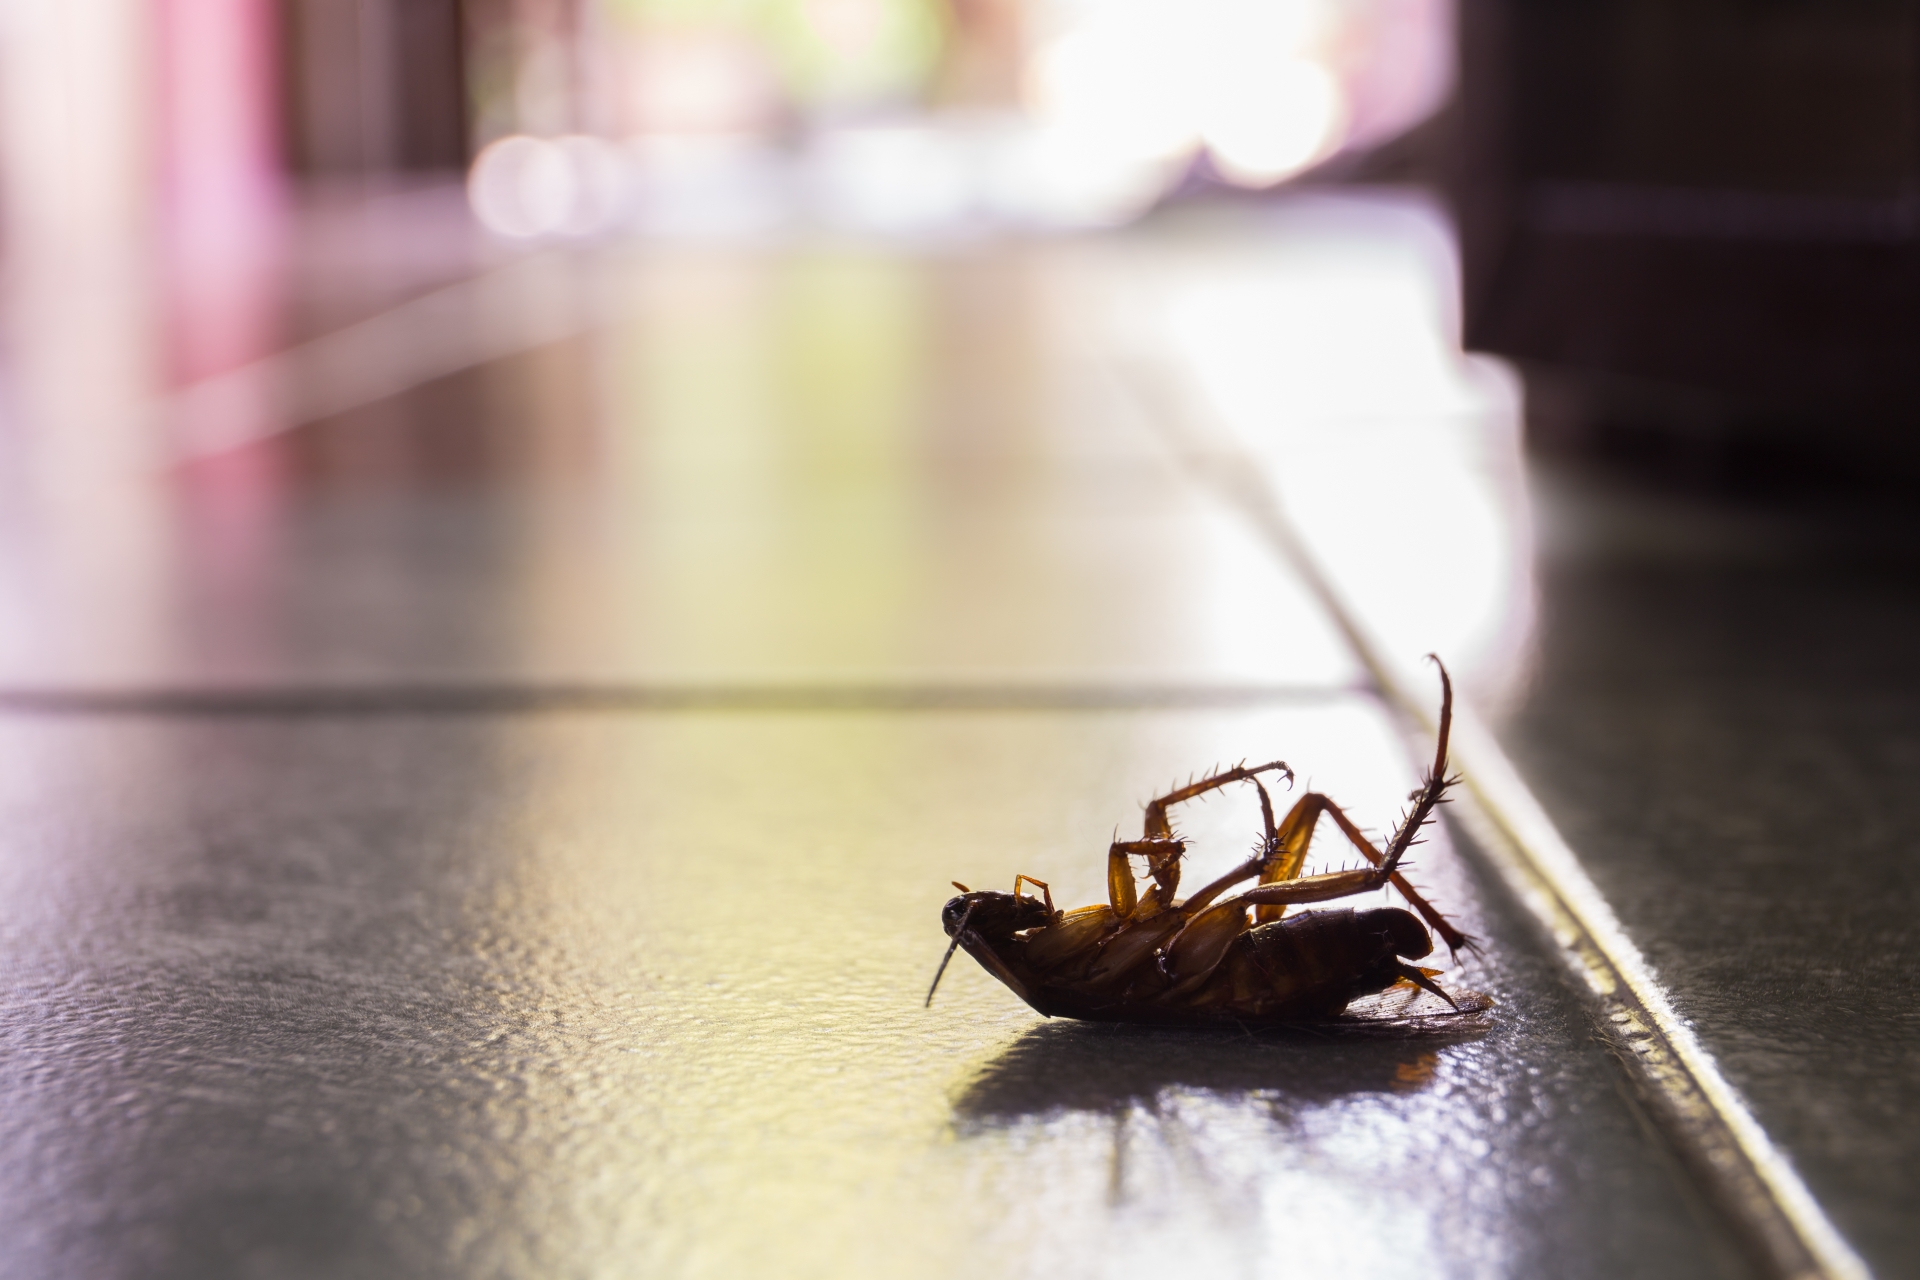 Cockroach Control, Pest Control in Wandsworth, SW18. Call Now 020 8166 9746